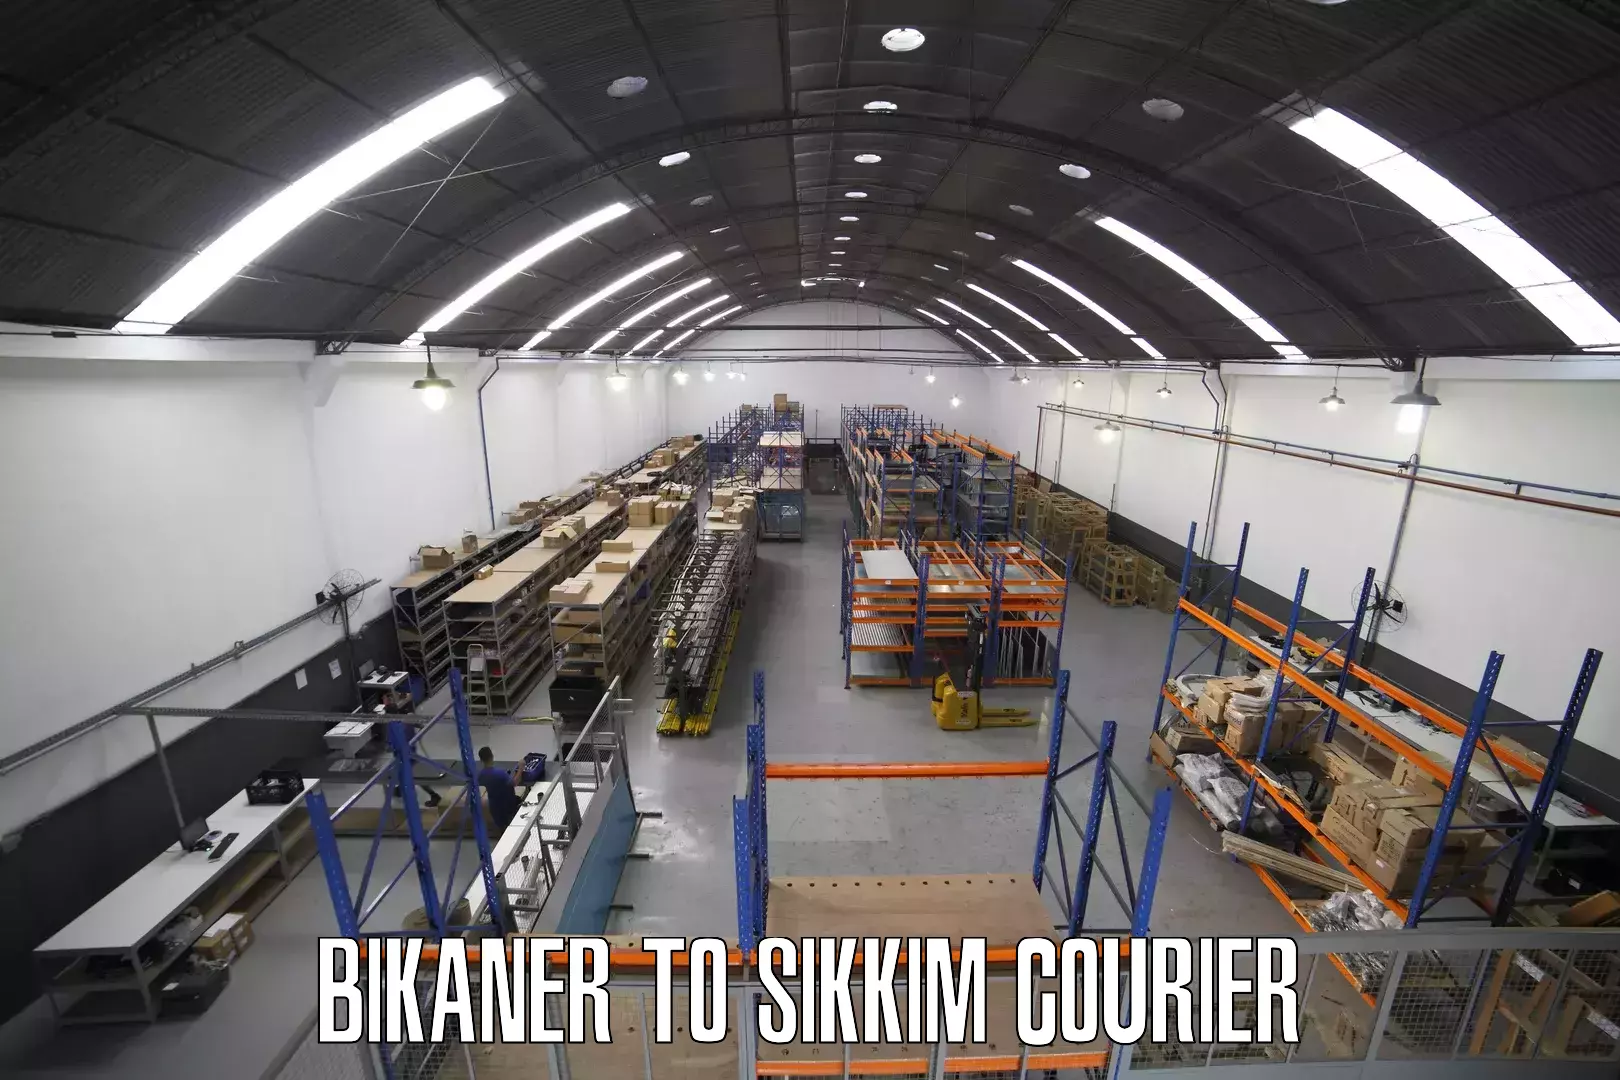 Subscription-based courier Bikaner to East Sikkim